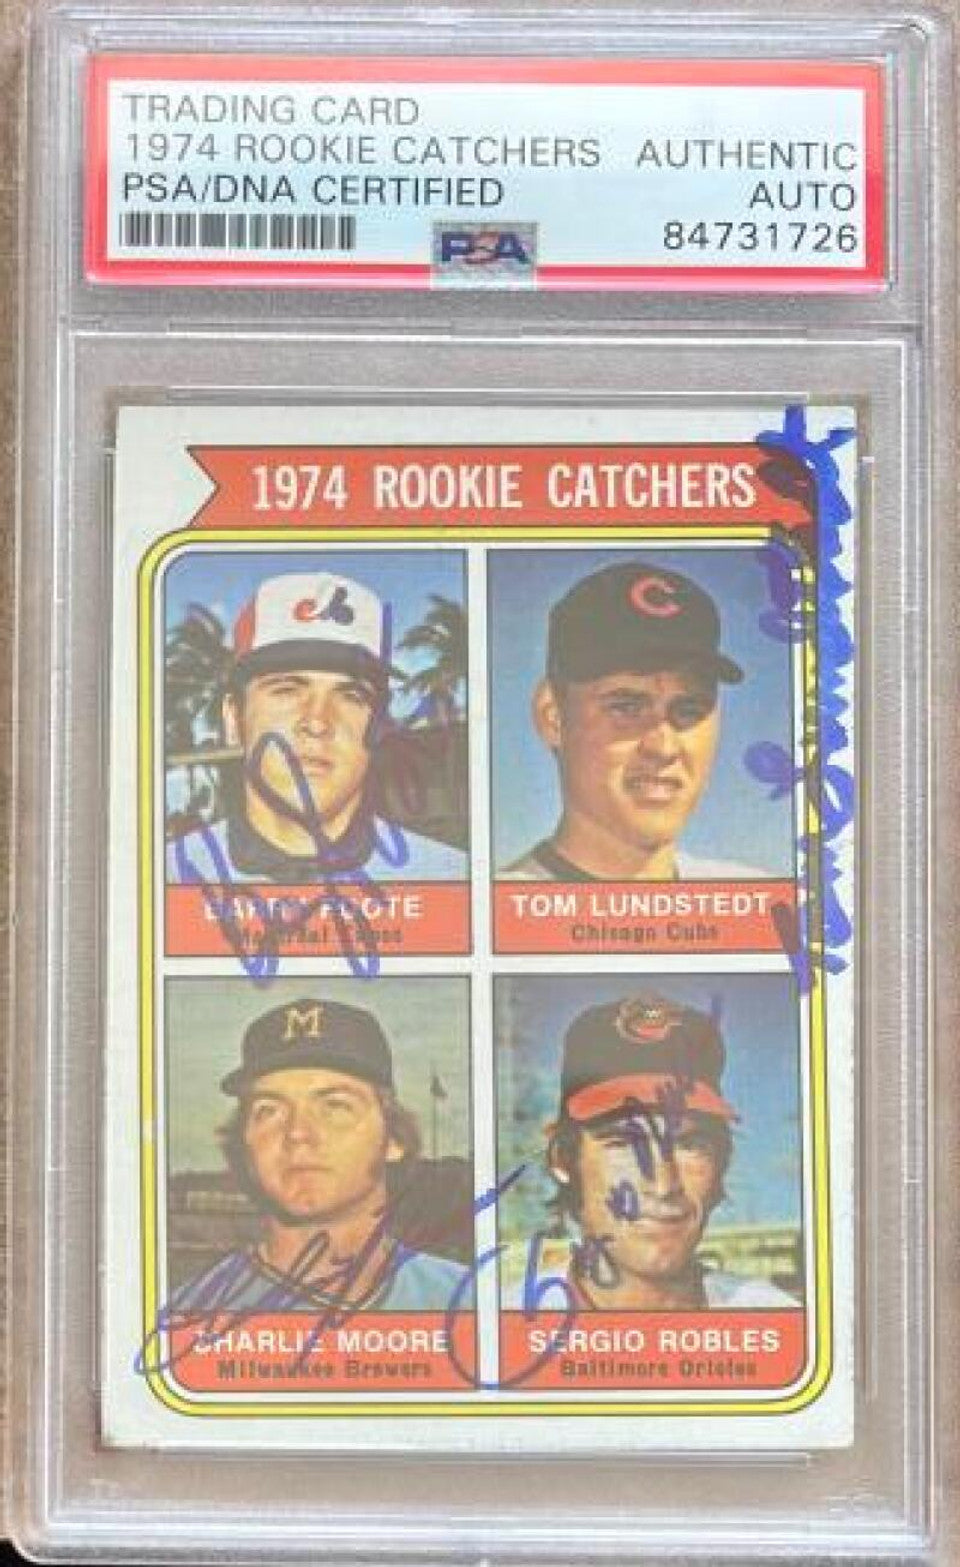 Barry Foote, Tom Lundstedt, Charlie Moore & Sergio Robles Multi Signed 1974 Topps Baseball Card - Rookie Catchers - PSA/DNA